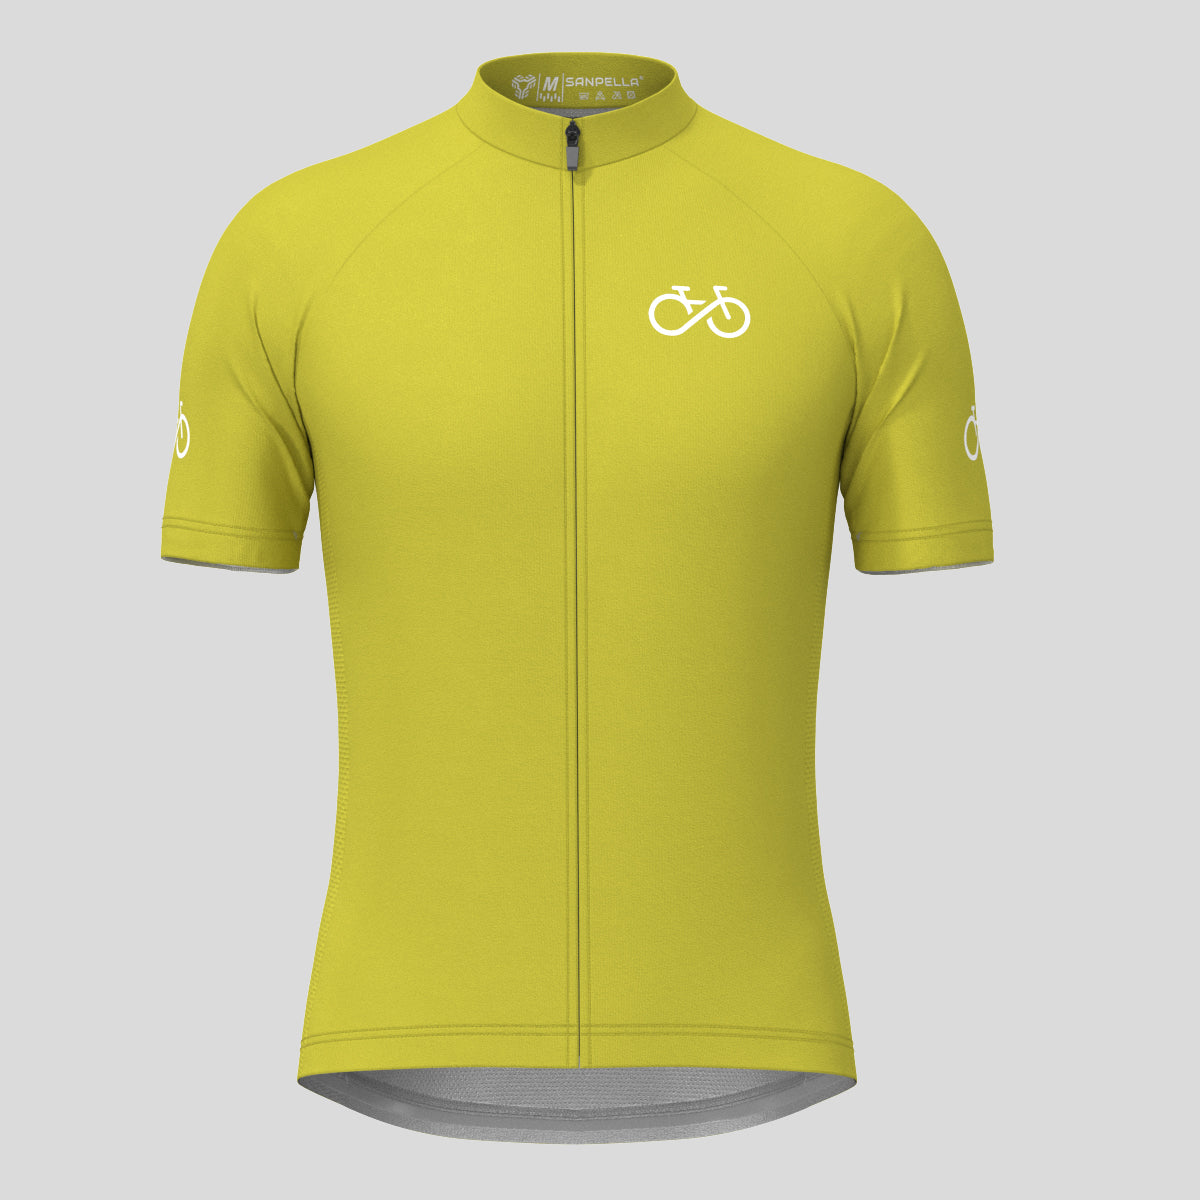 Ride Forever Men's Cycling Jersey -Fern